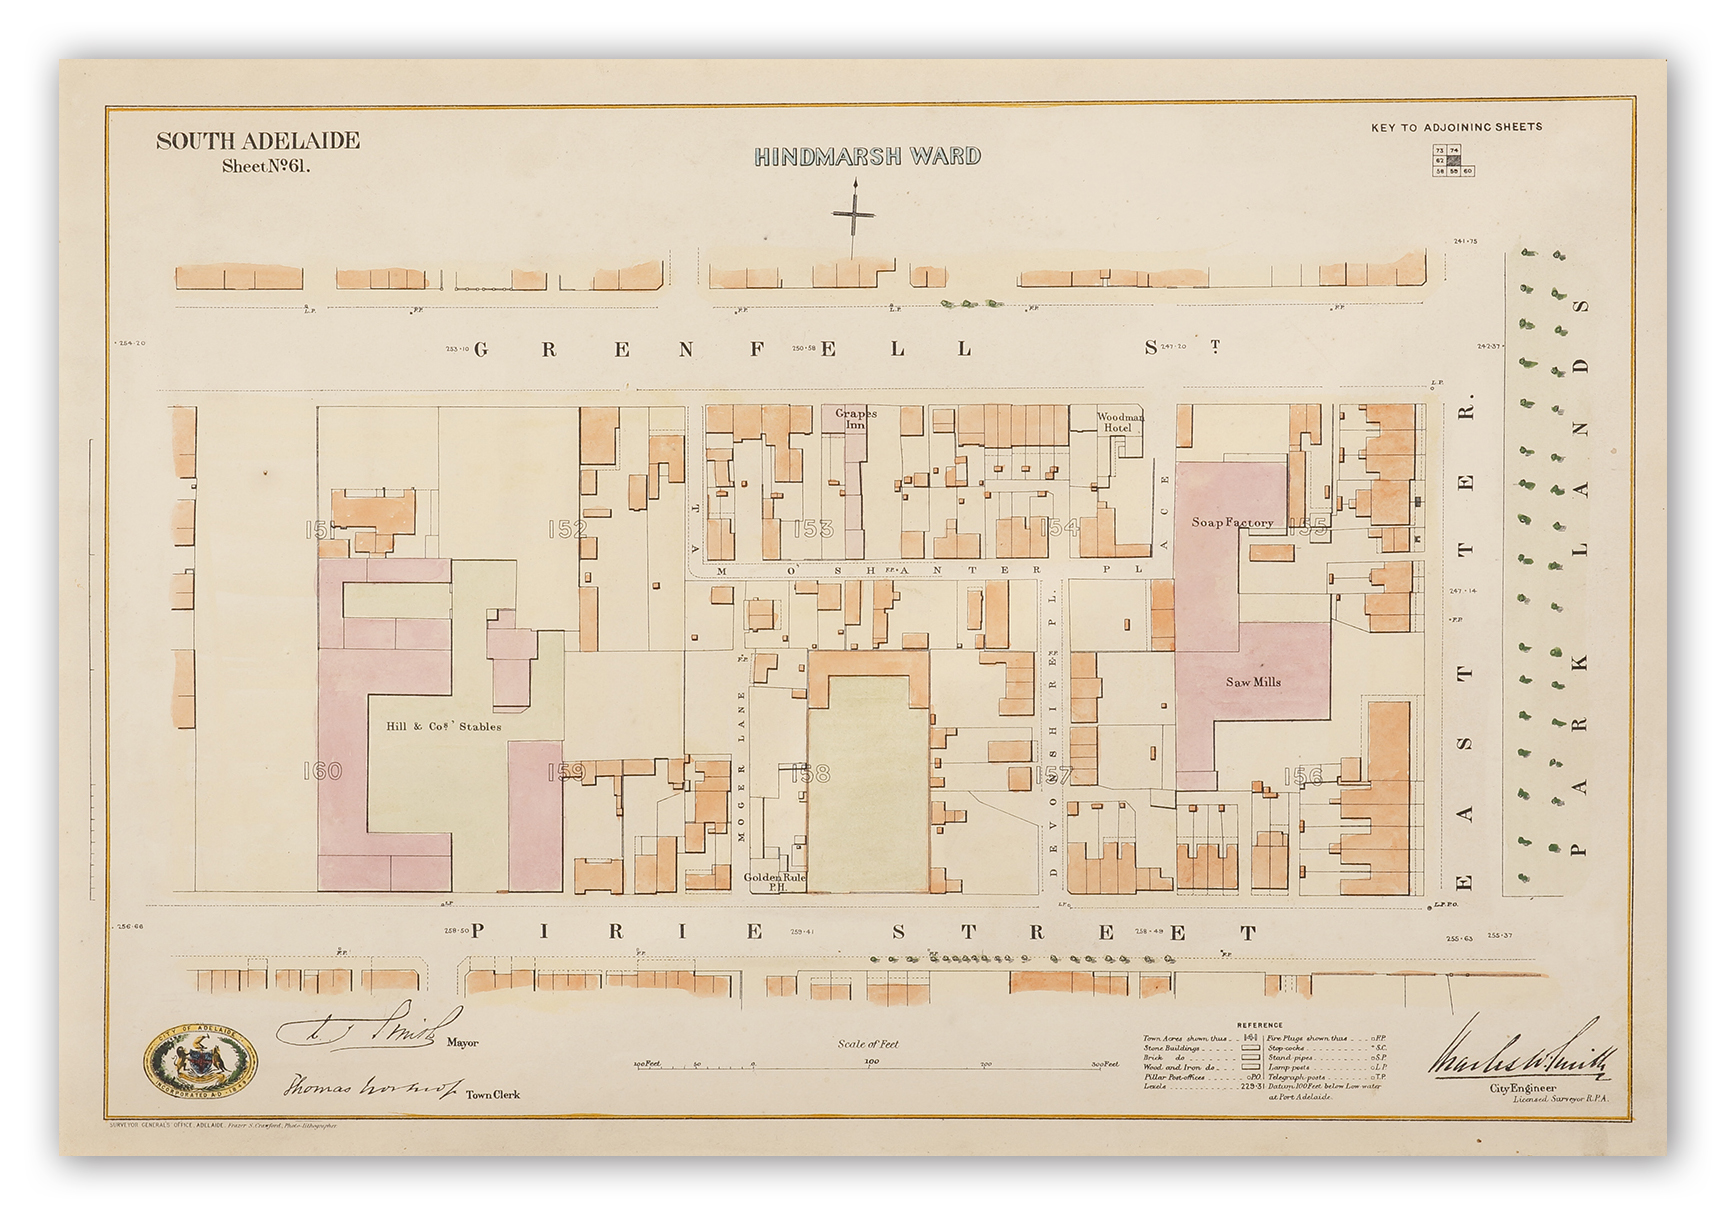 [Grenfell St./East Terrace./Pirie St.] South Adelaide Sheet No. 61 - Antique Map from 1882